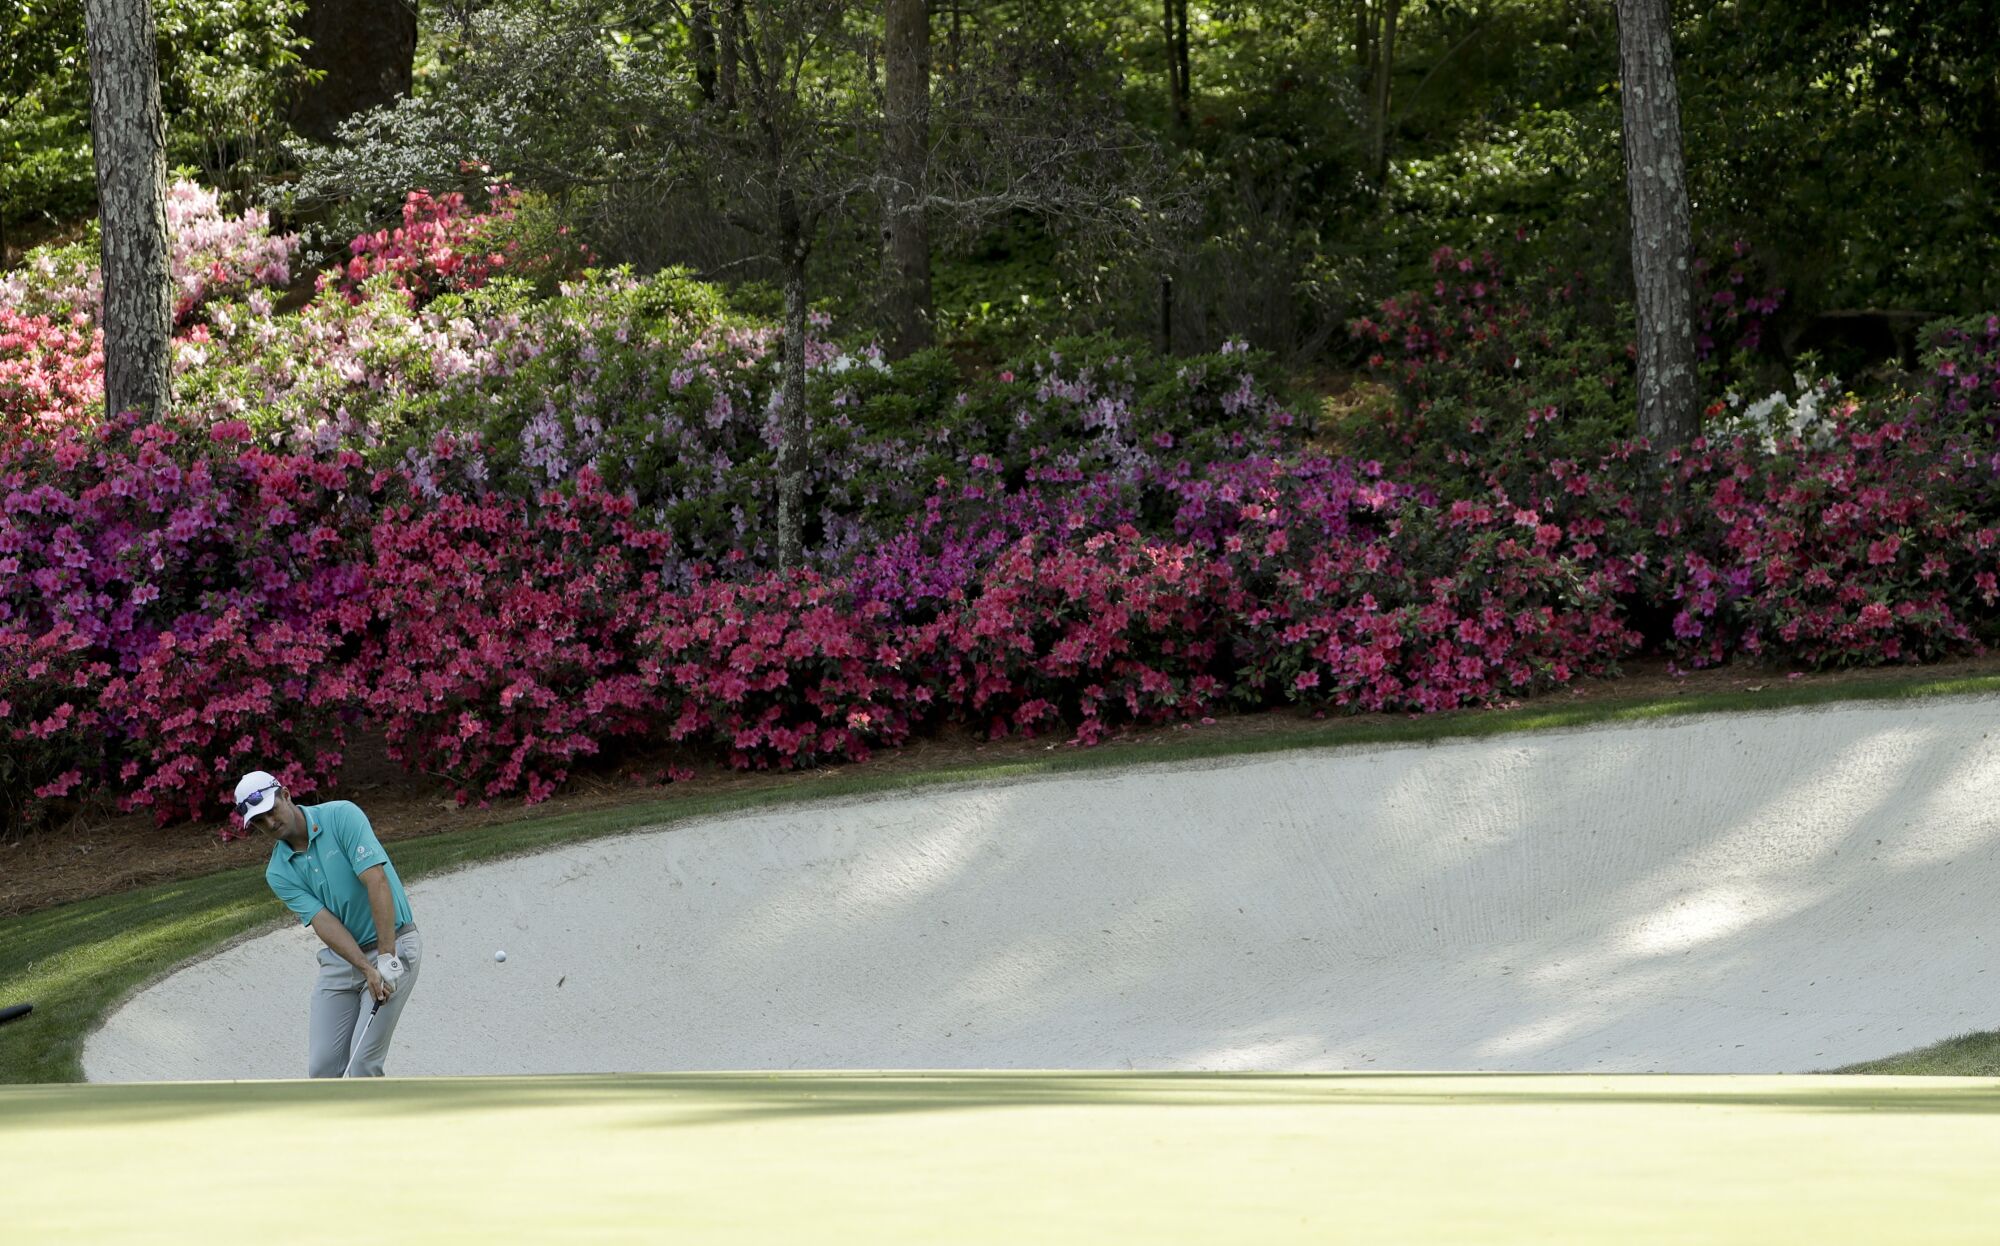 Justin Rose hits a chip on the 13th hole during practice for the 2018 Masters at Augusta National.